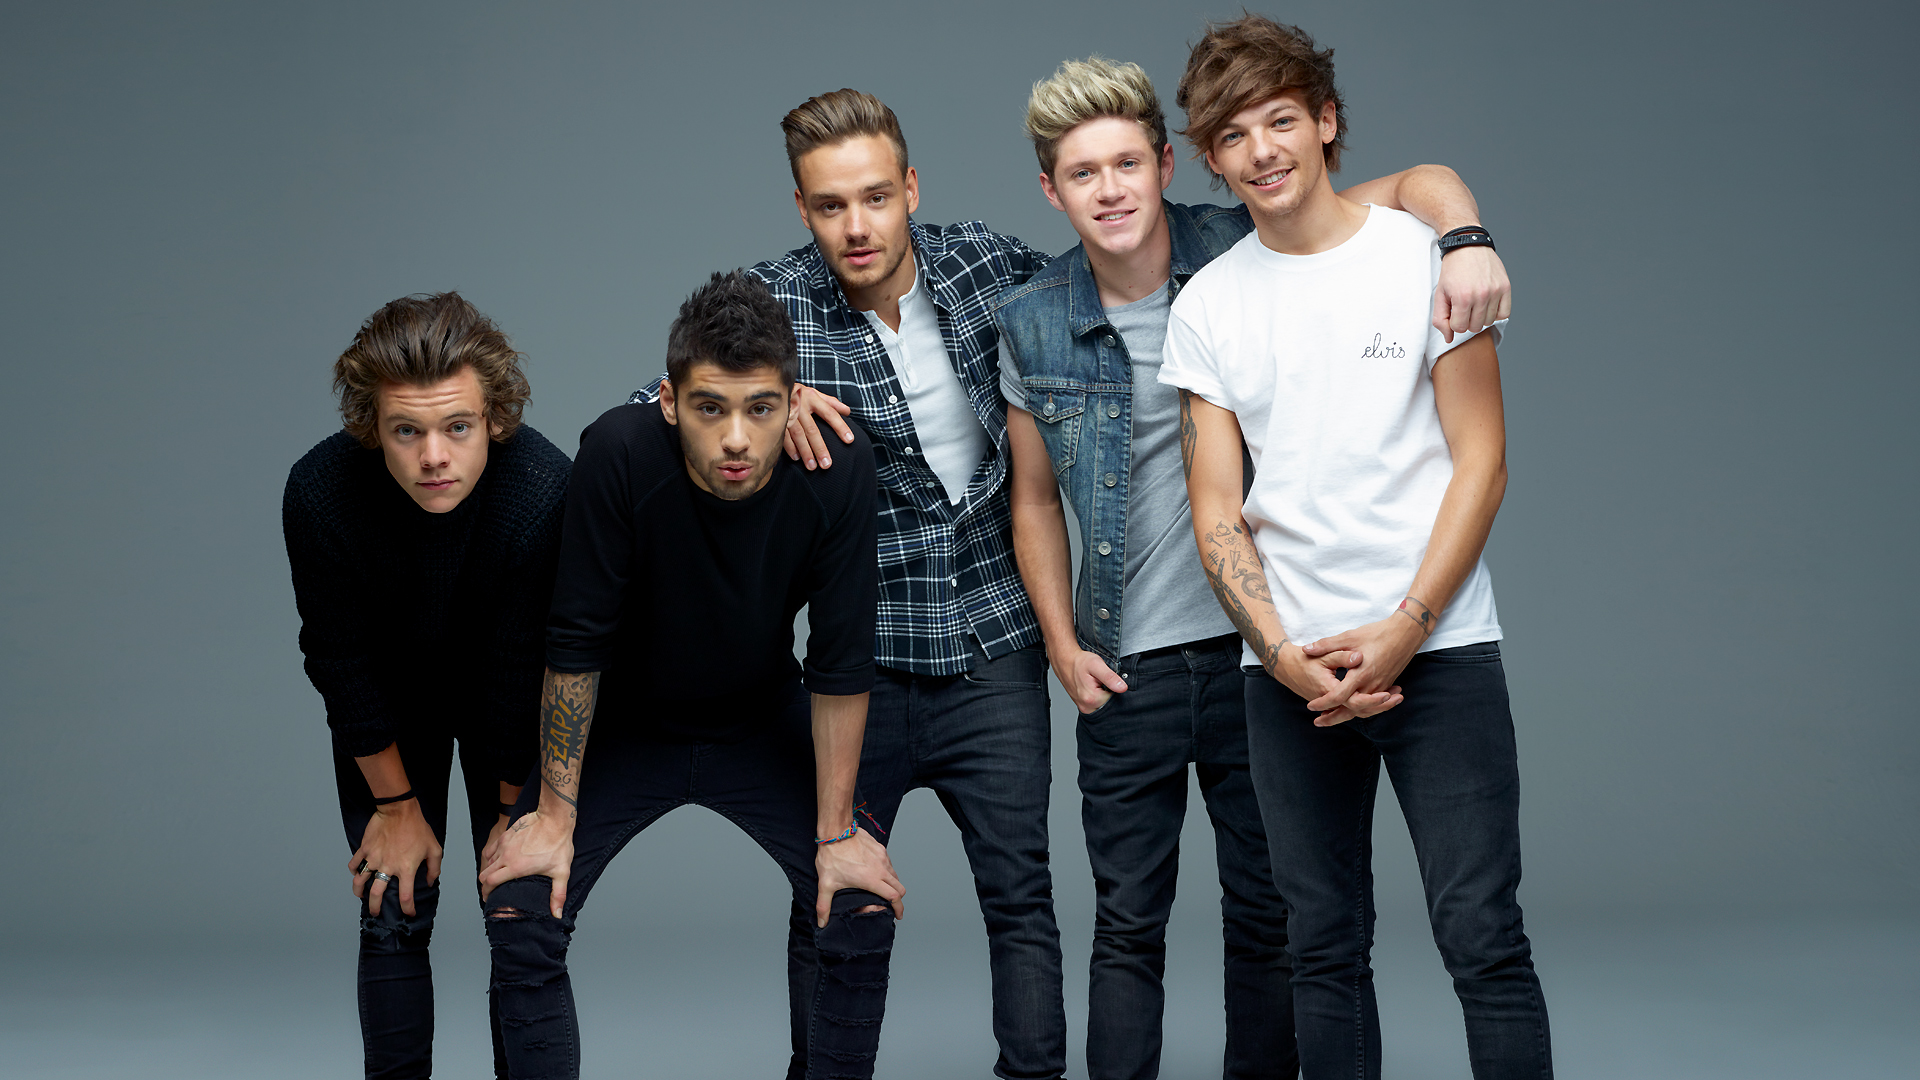 Wonderful One Direction Wallpaper Full HD Pictures